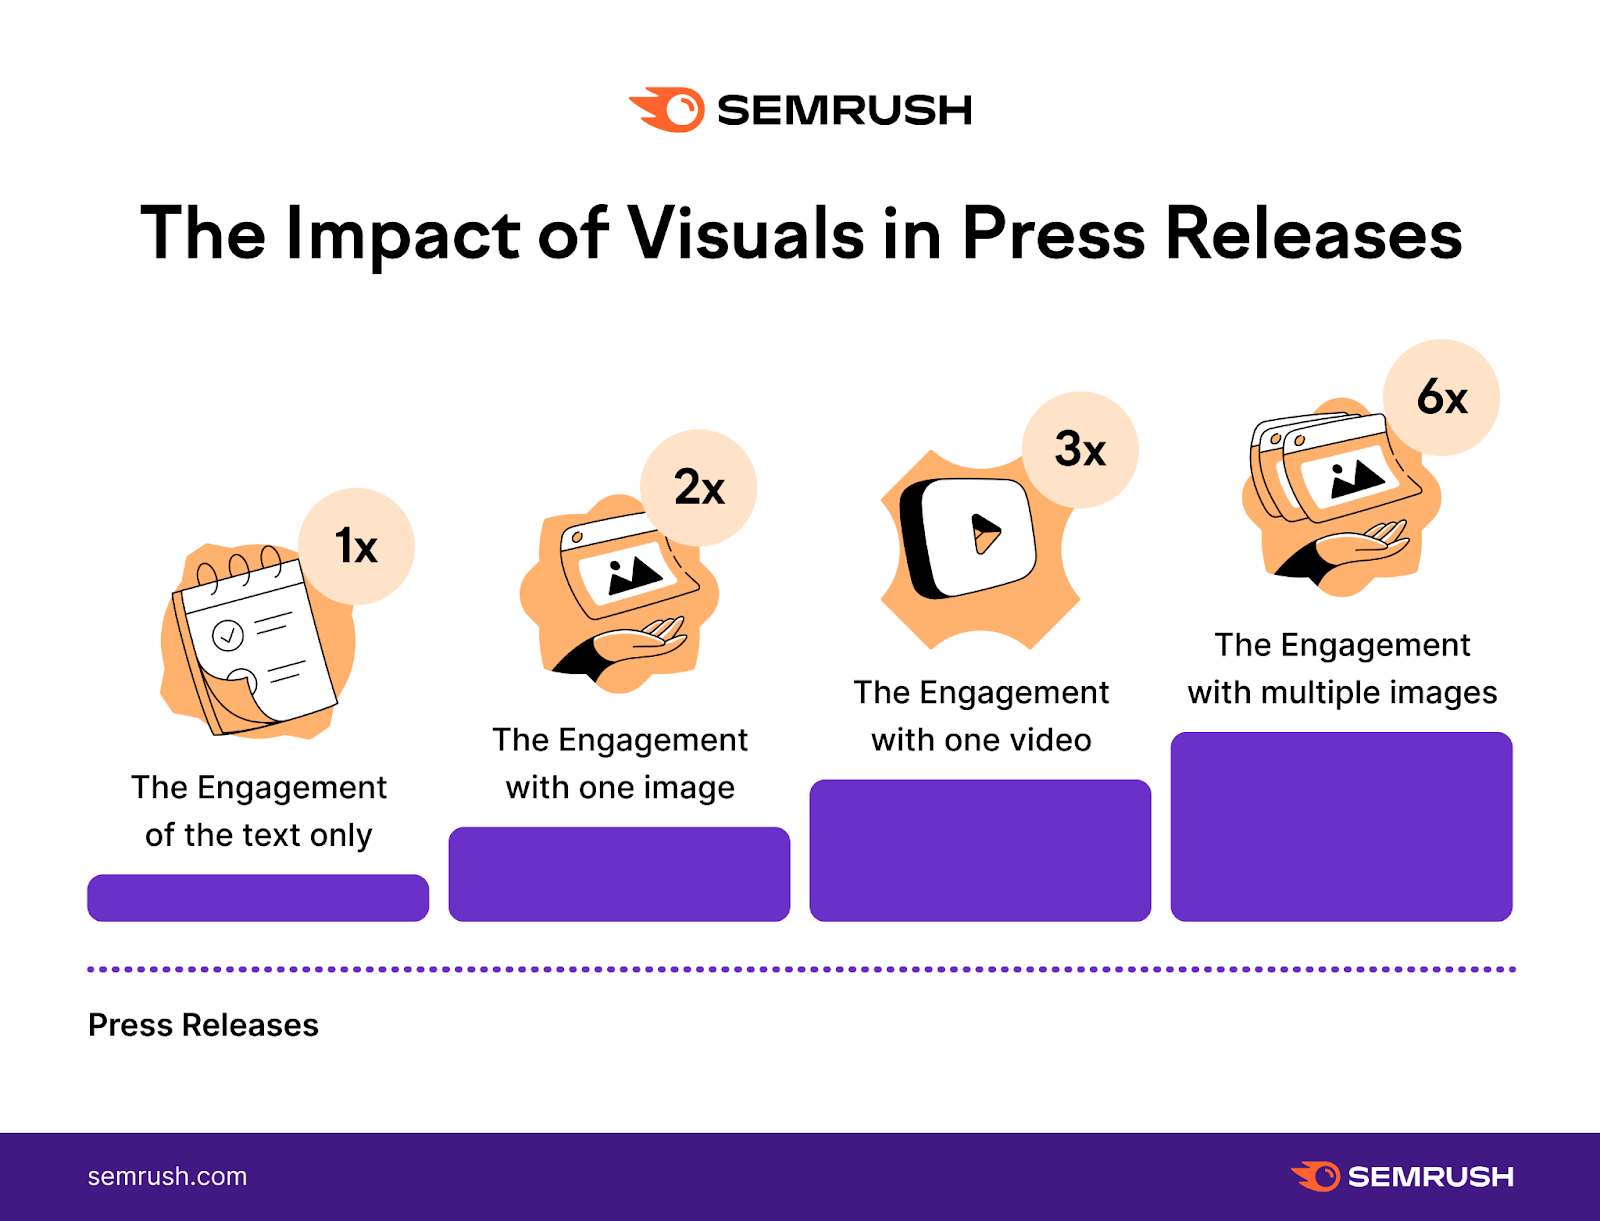 An infographic showing the impact of visuals in press releases